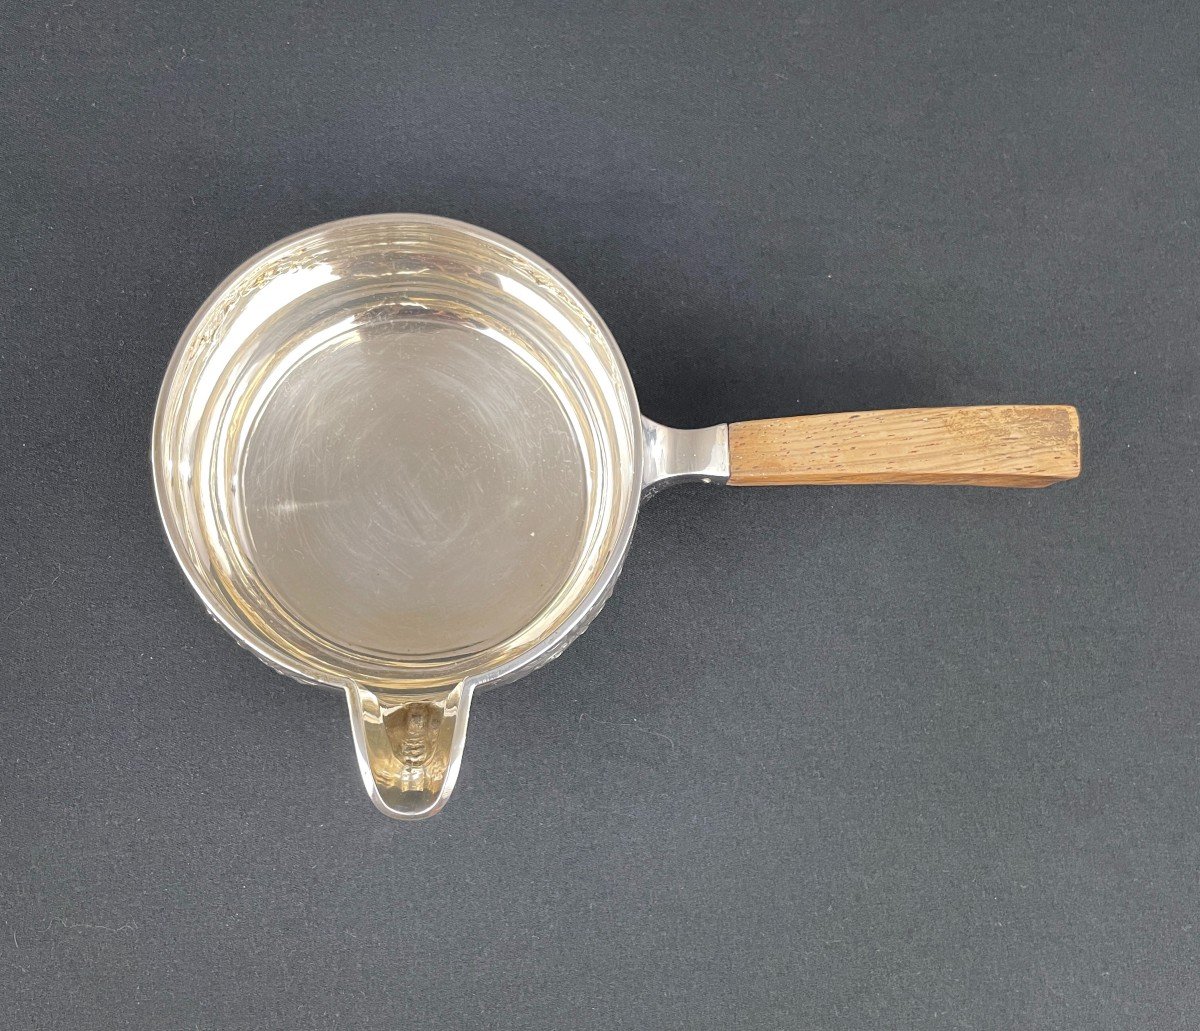 Saucepan With Rocailles Decor In Sterling Silver And Wooden Handle-photo-3